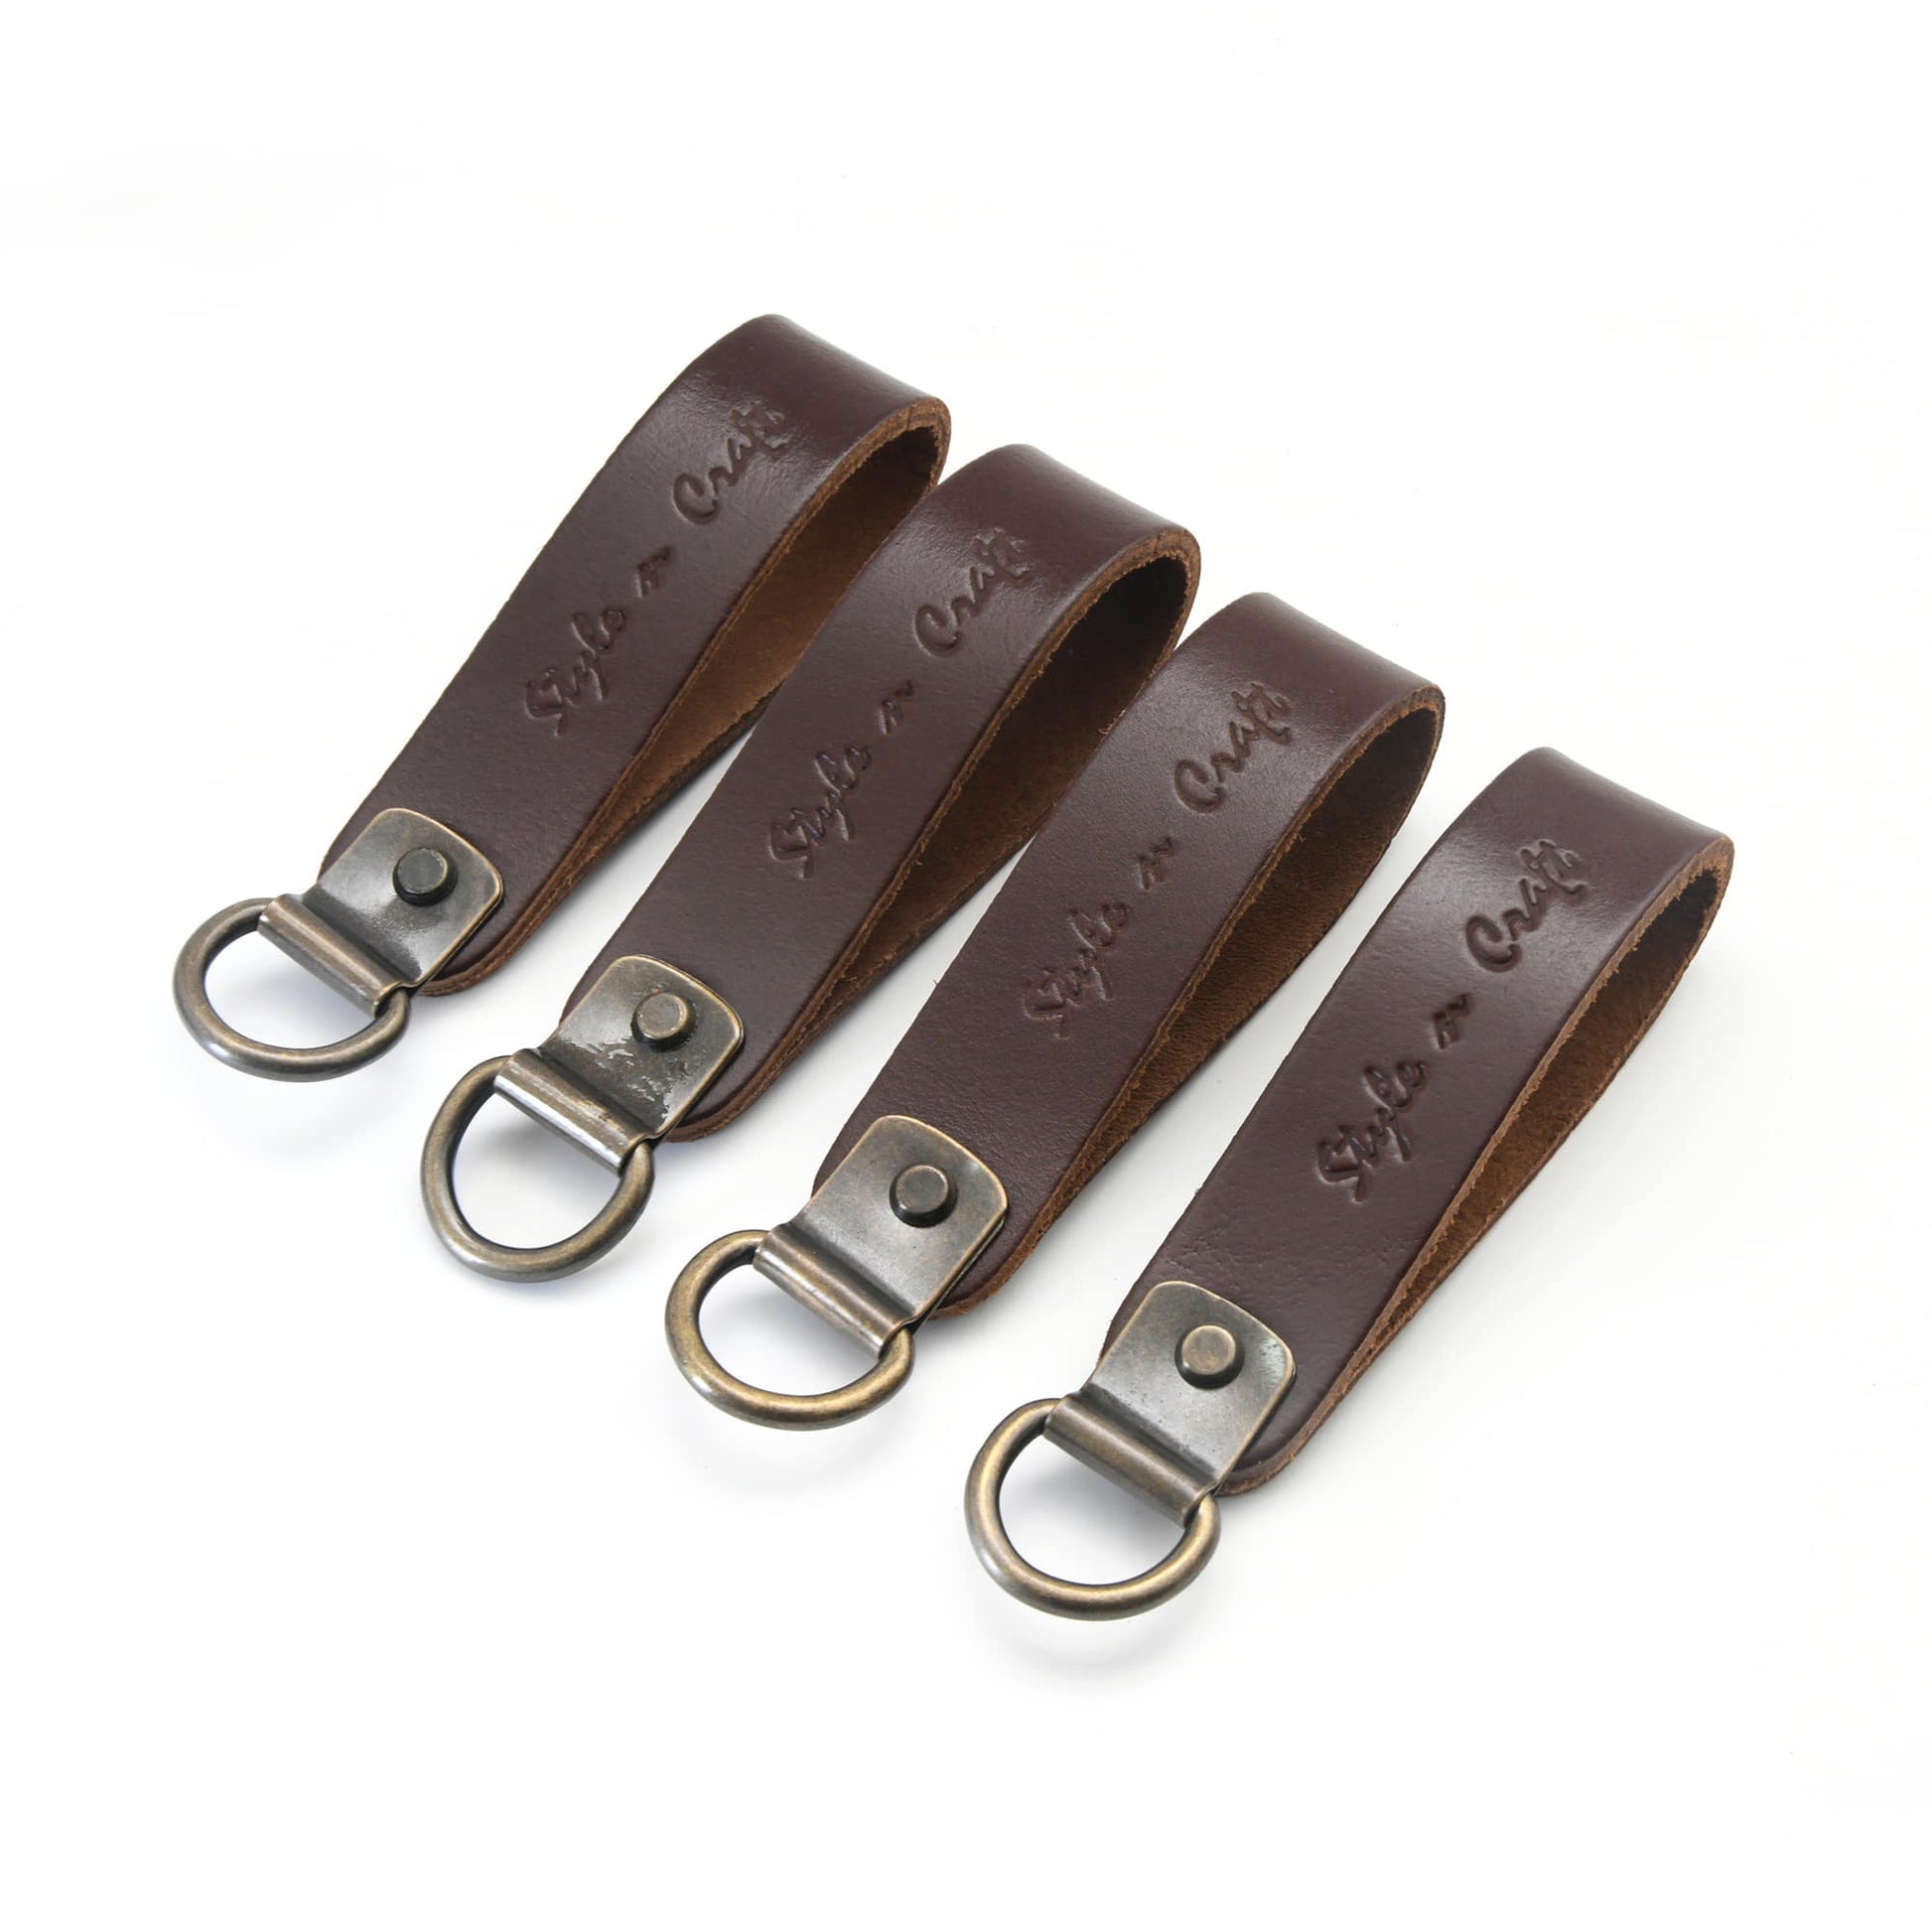 Braided Leather Loop Snap Key Chain